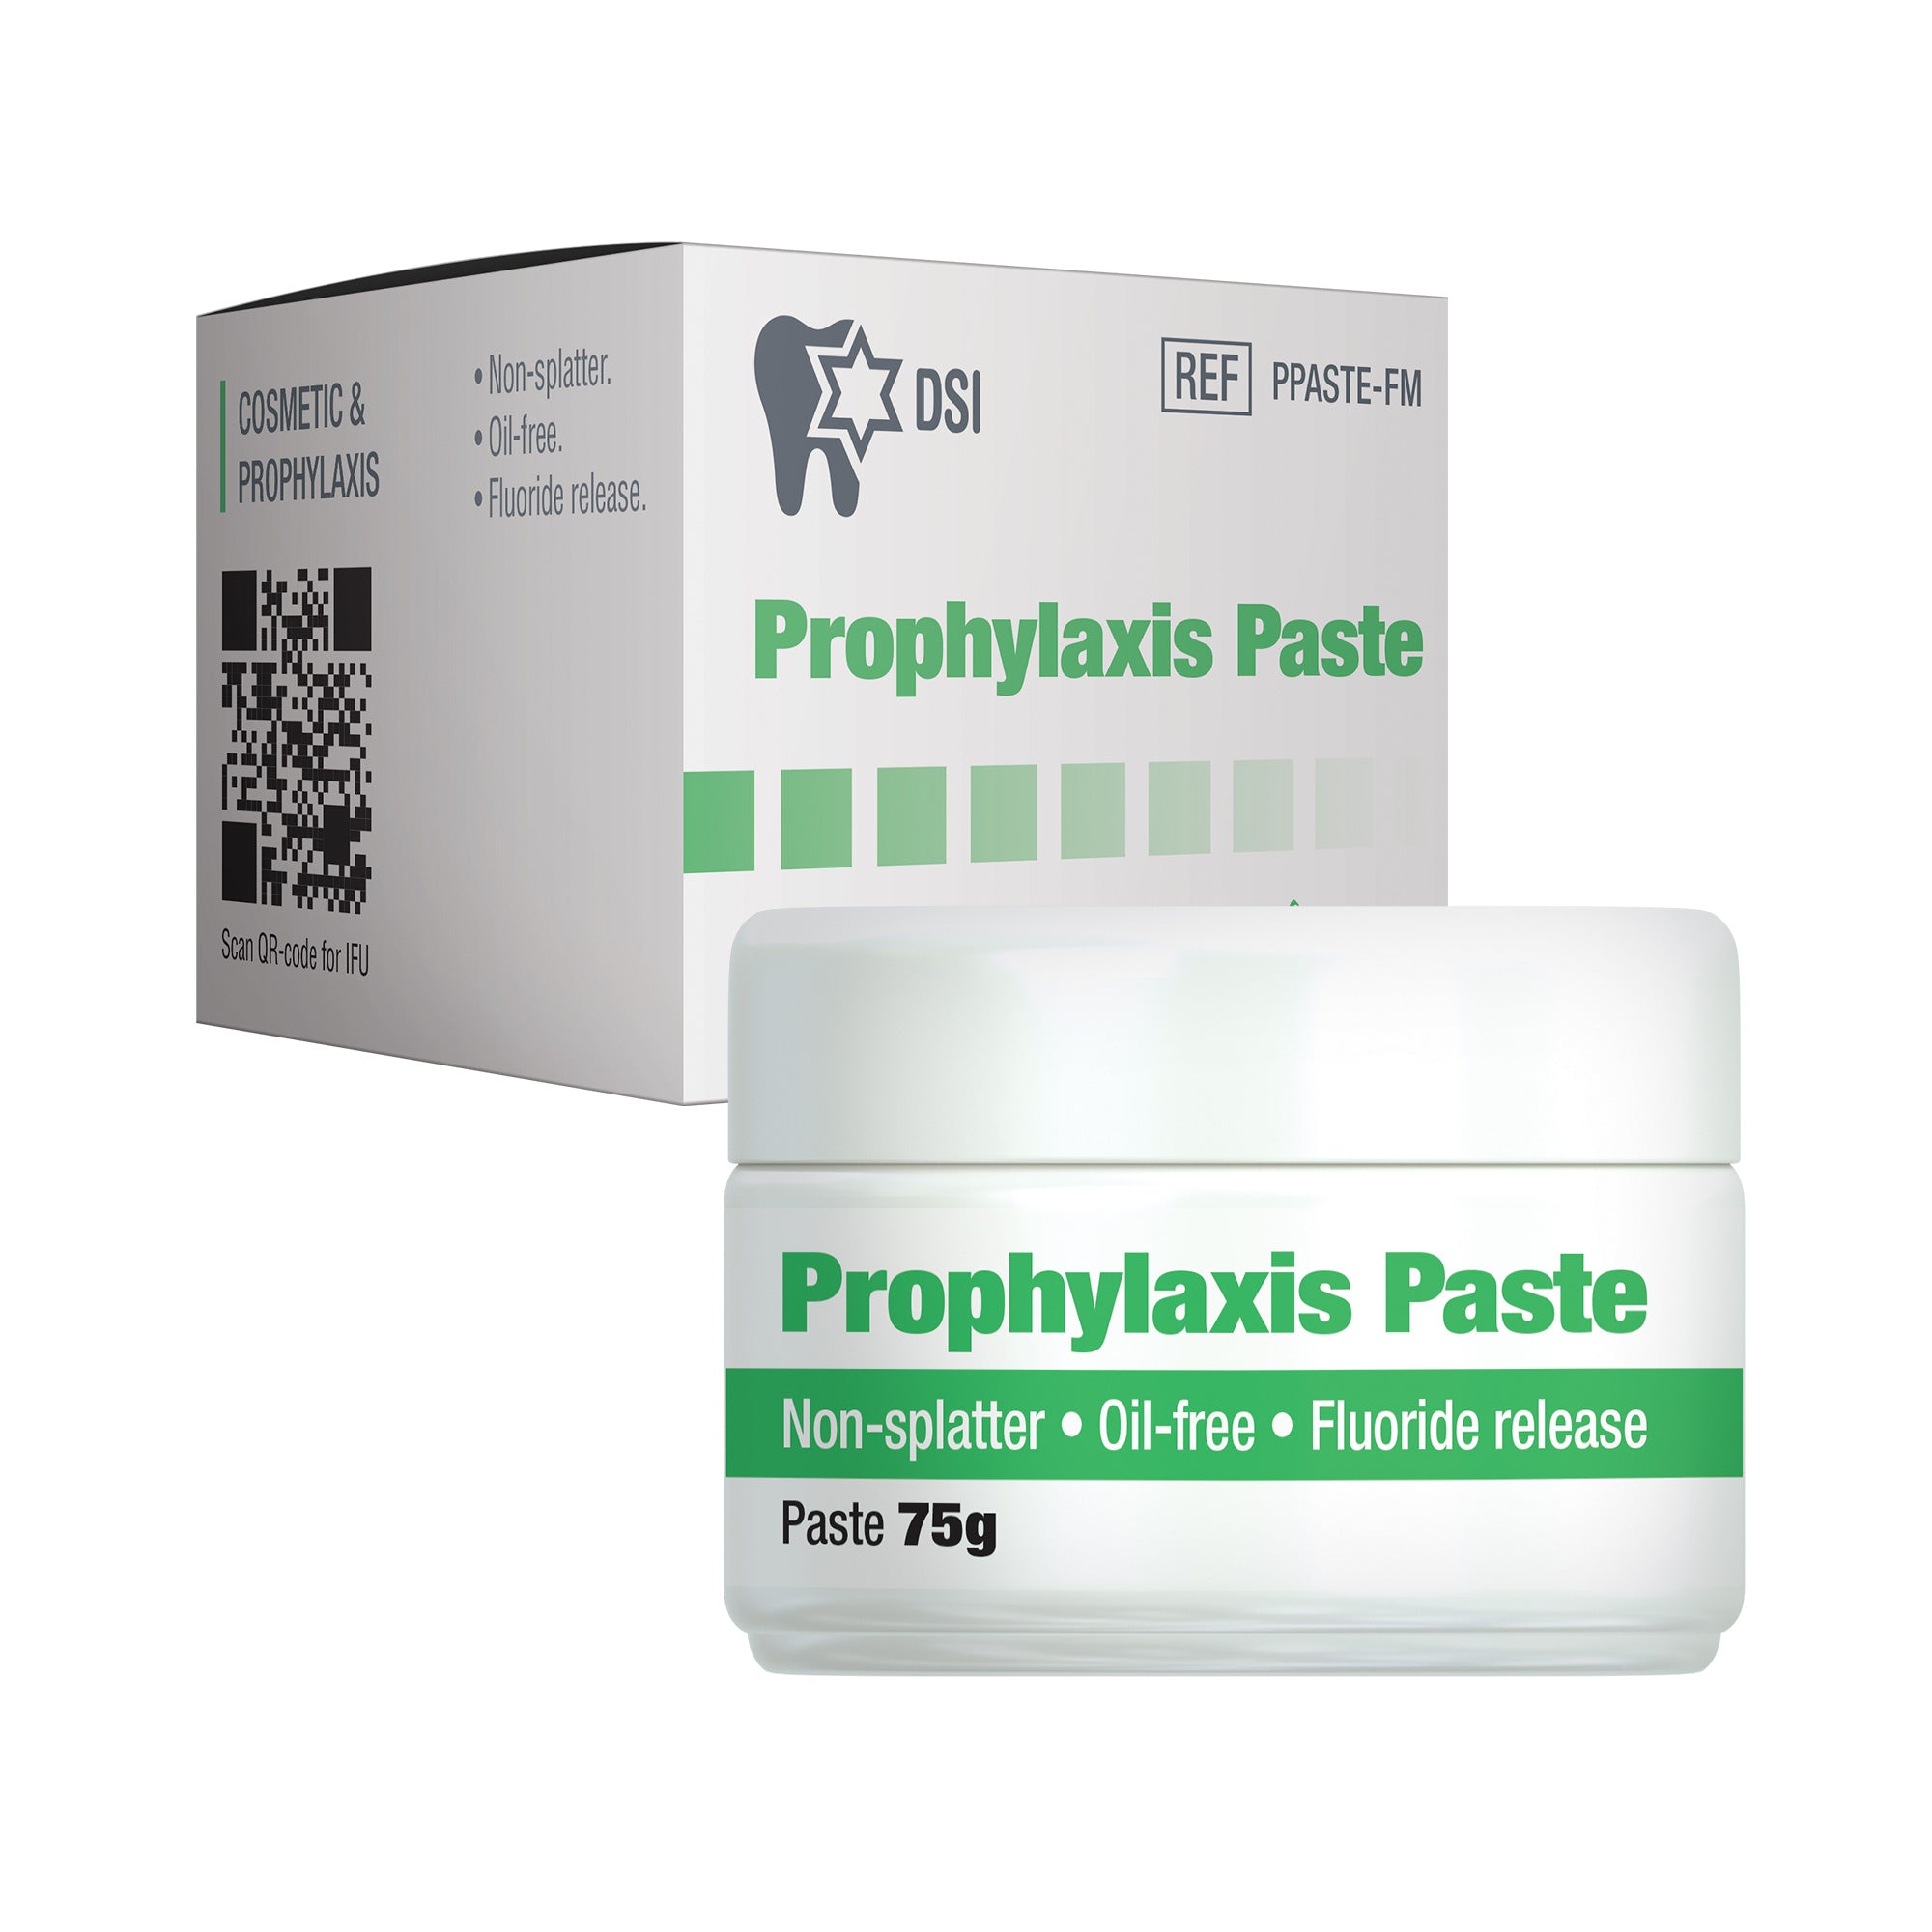 DSI Prophylaxis Abrasive Paste For Polishing After Scaling Mint 75g